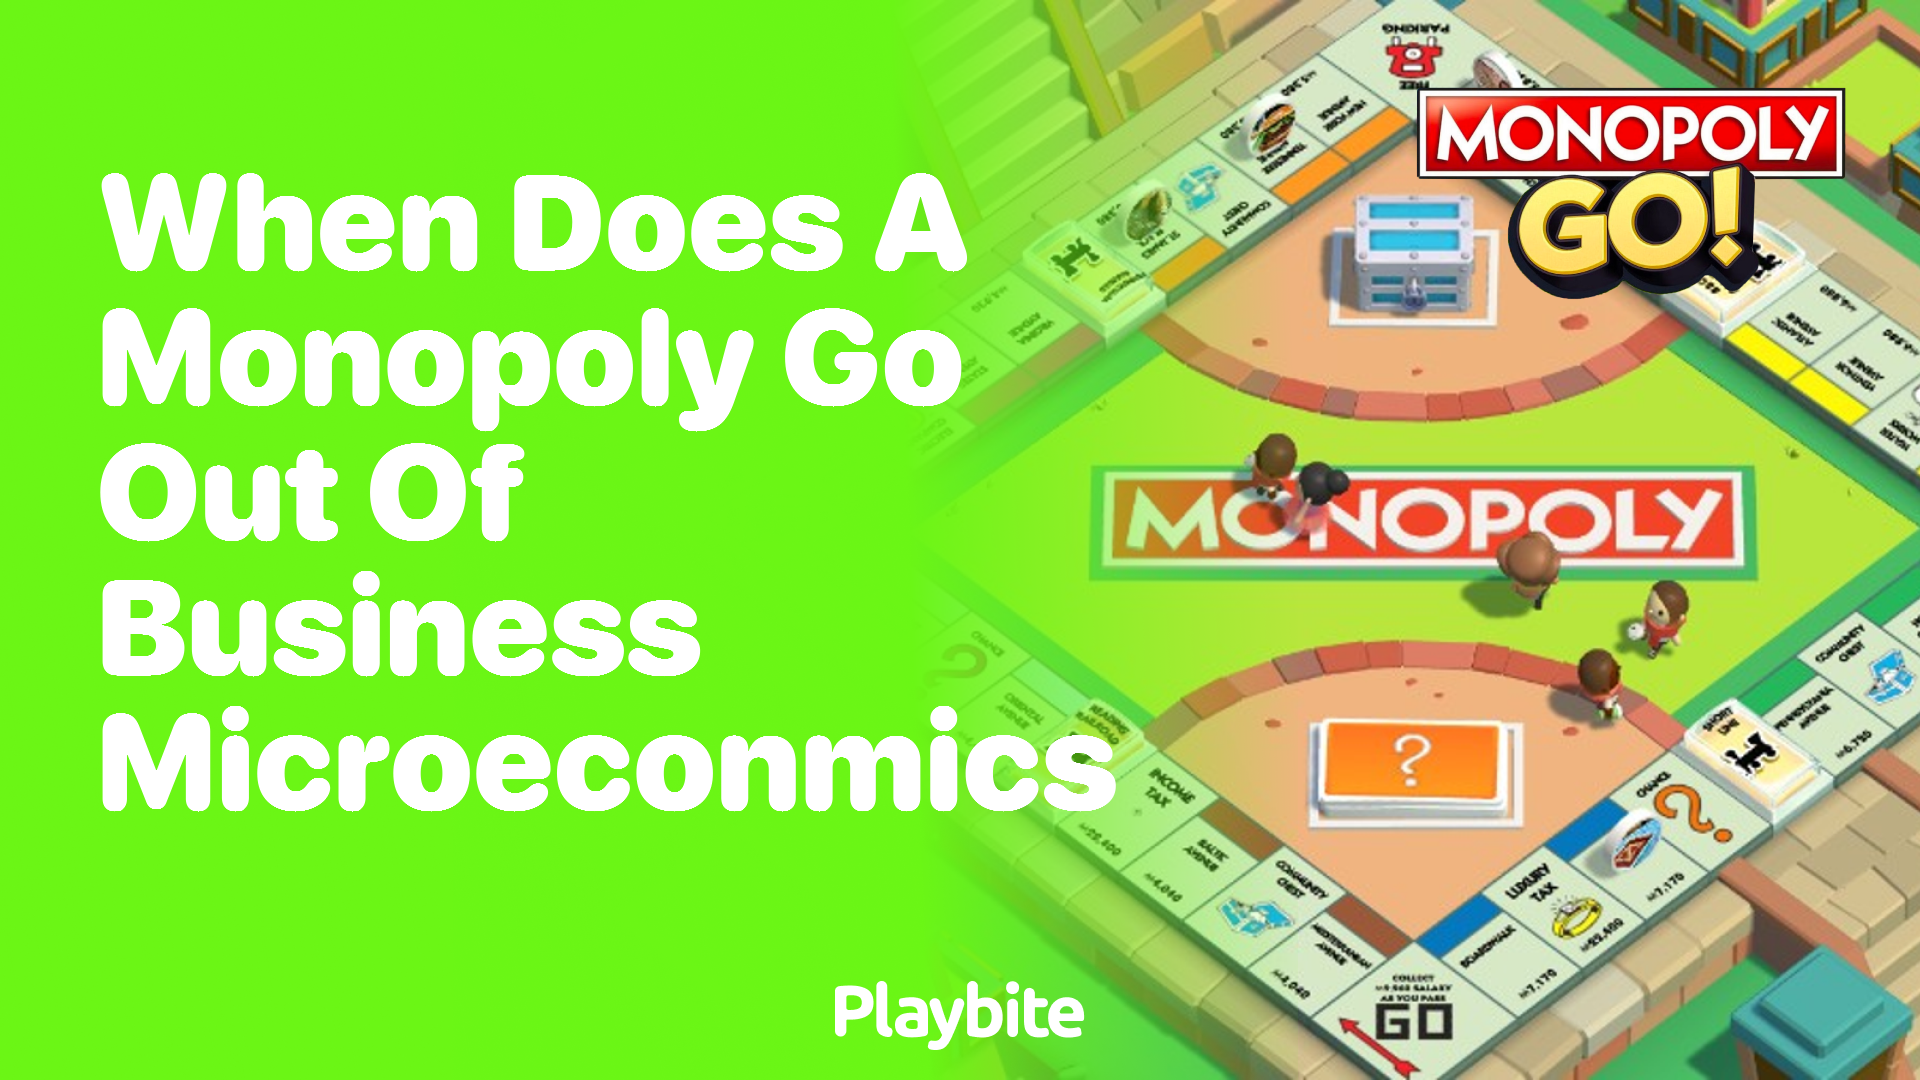 When Does a Monopoly Go Out of Business in Microeconomics?